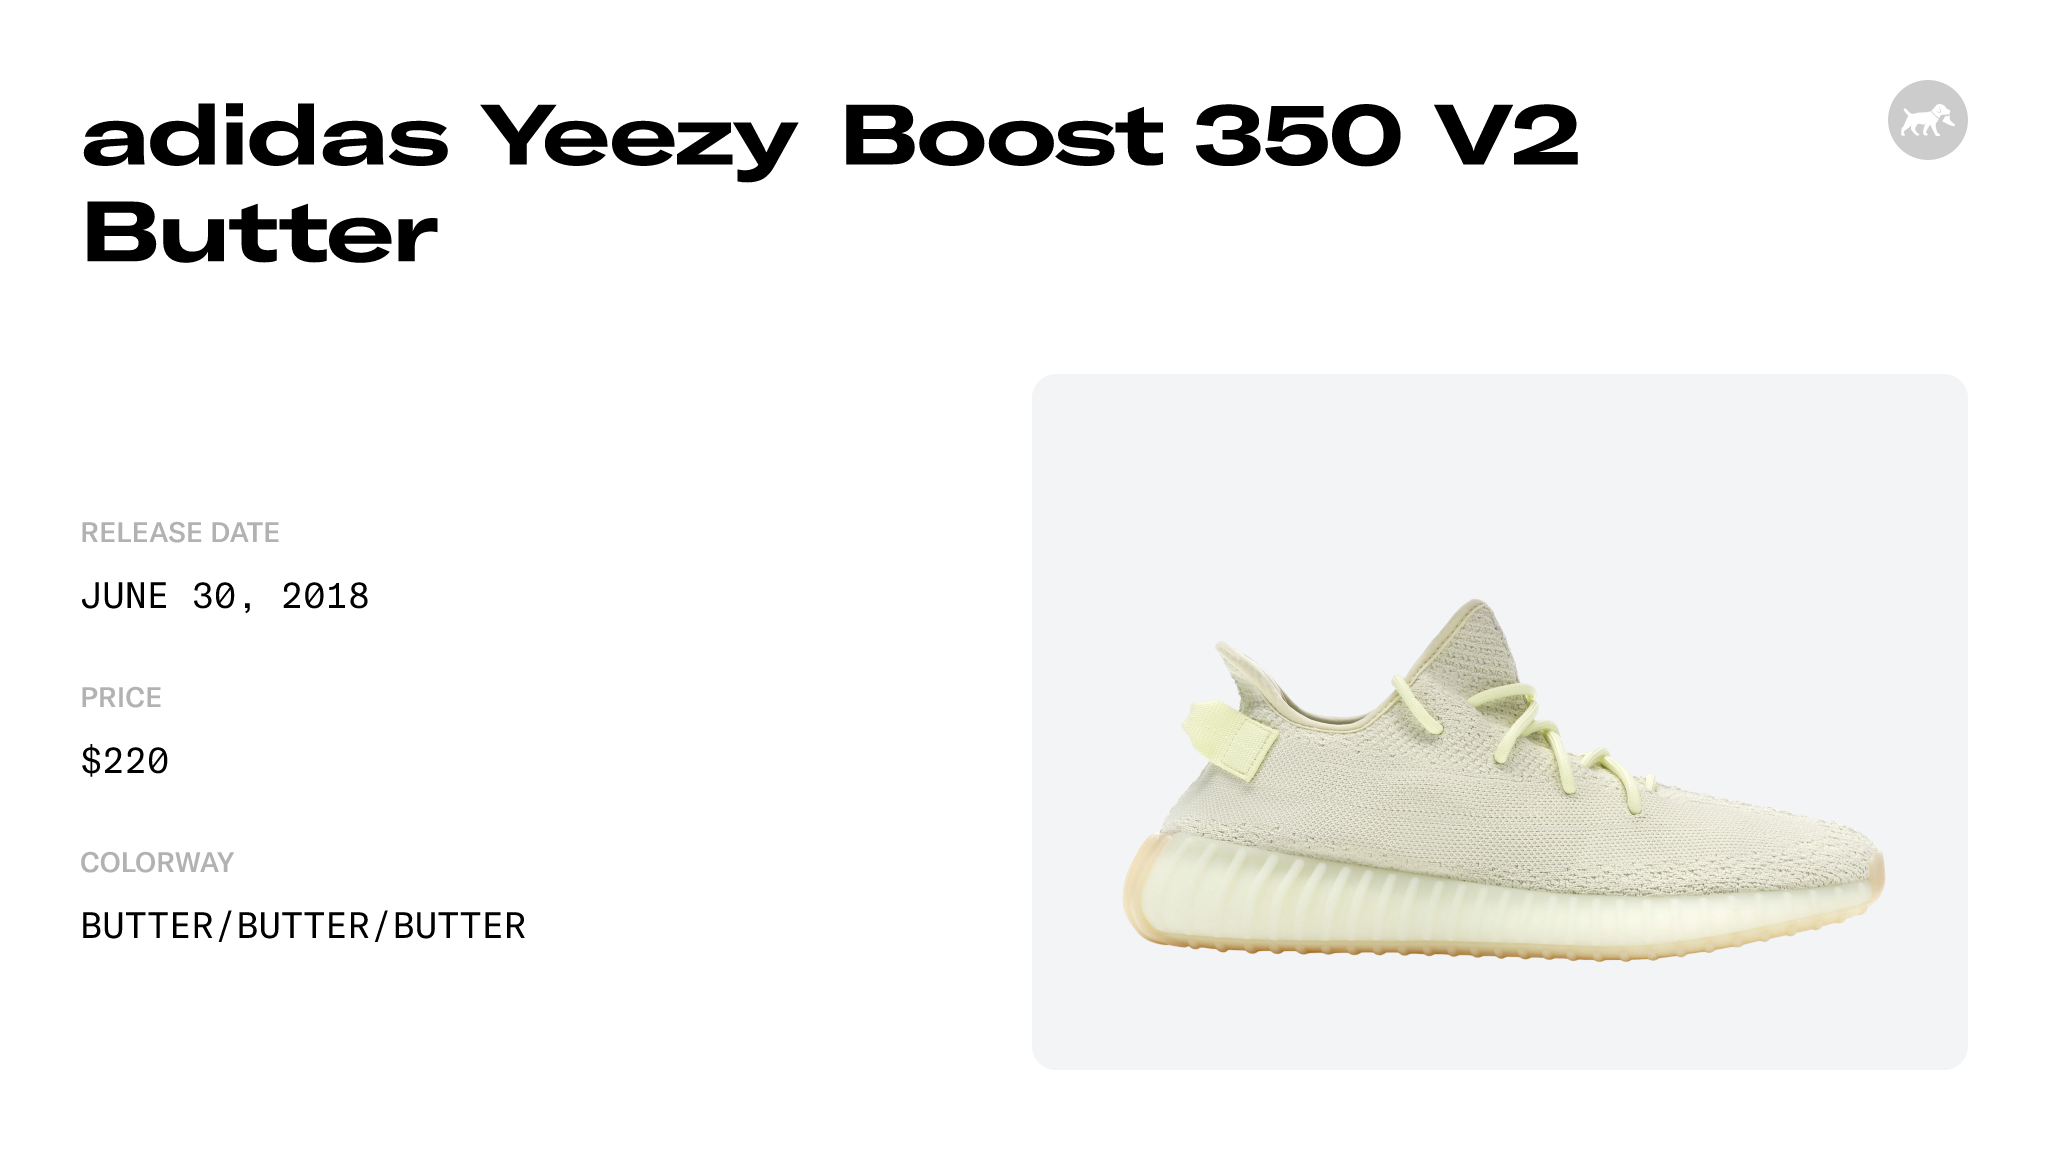 adidas Yeezy Boost 350 V2 Butter - F36980 Raffles and Release Date